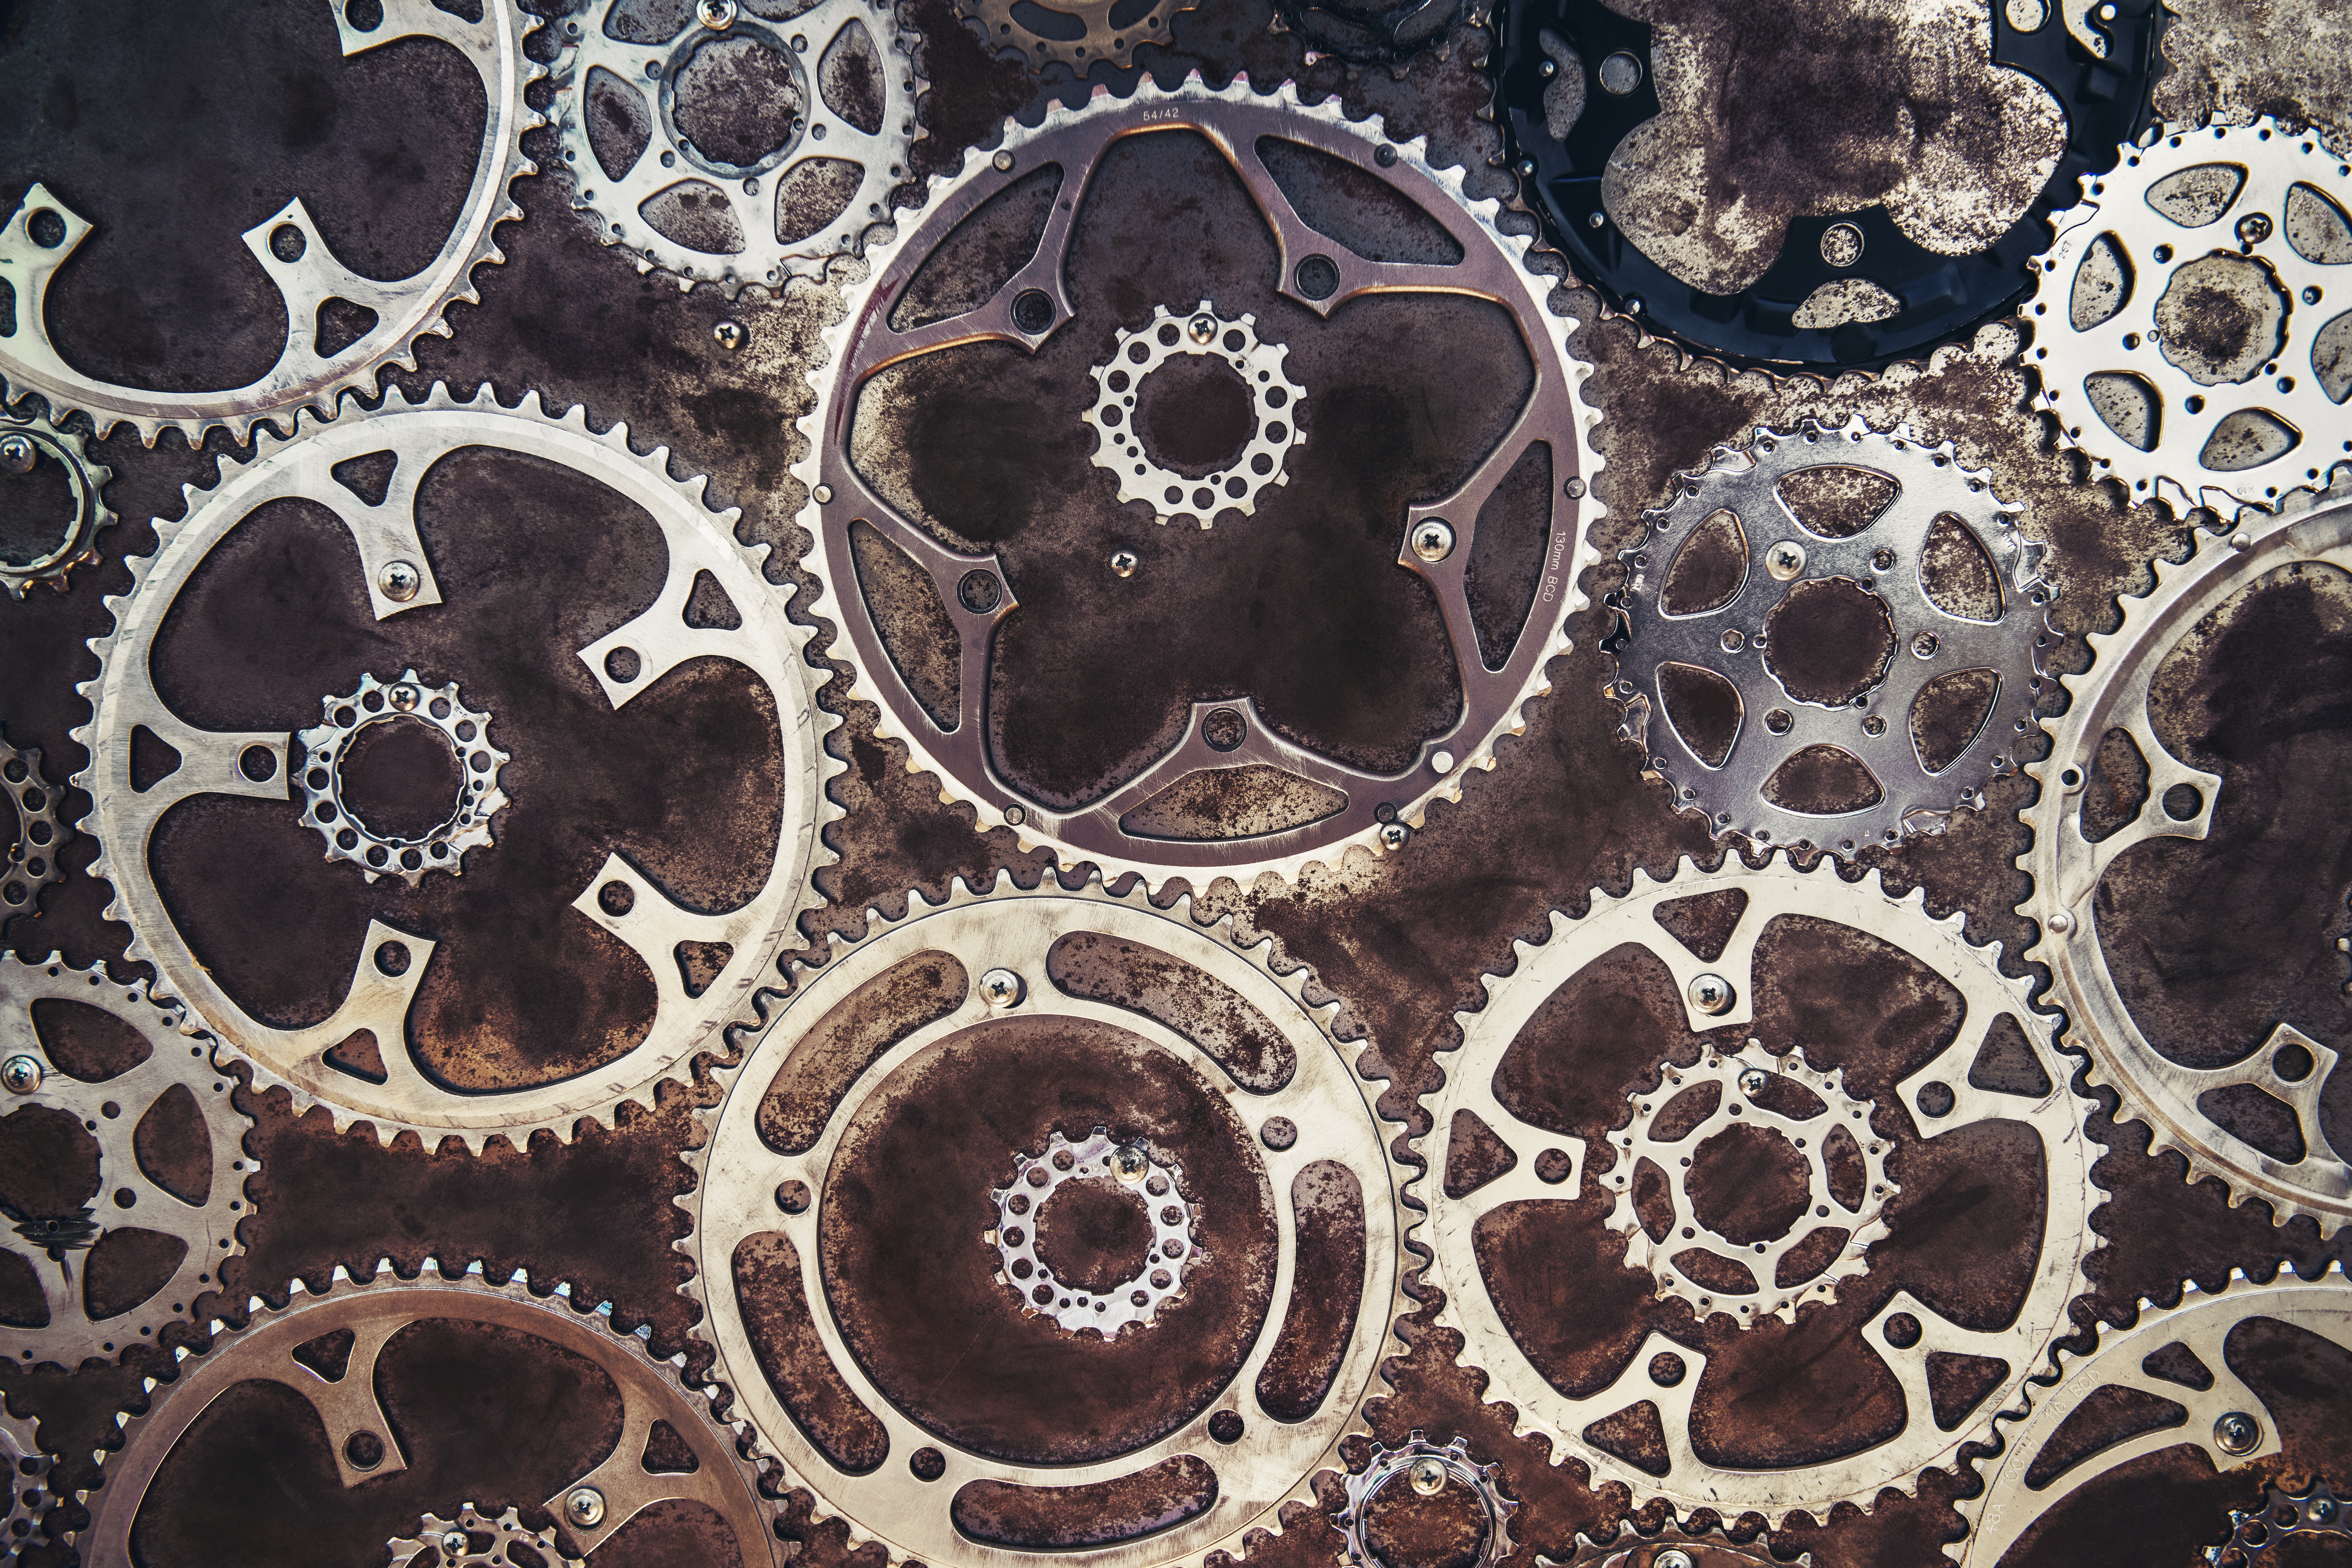 Image of cogs and gears